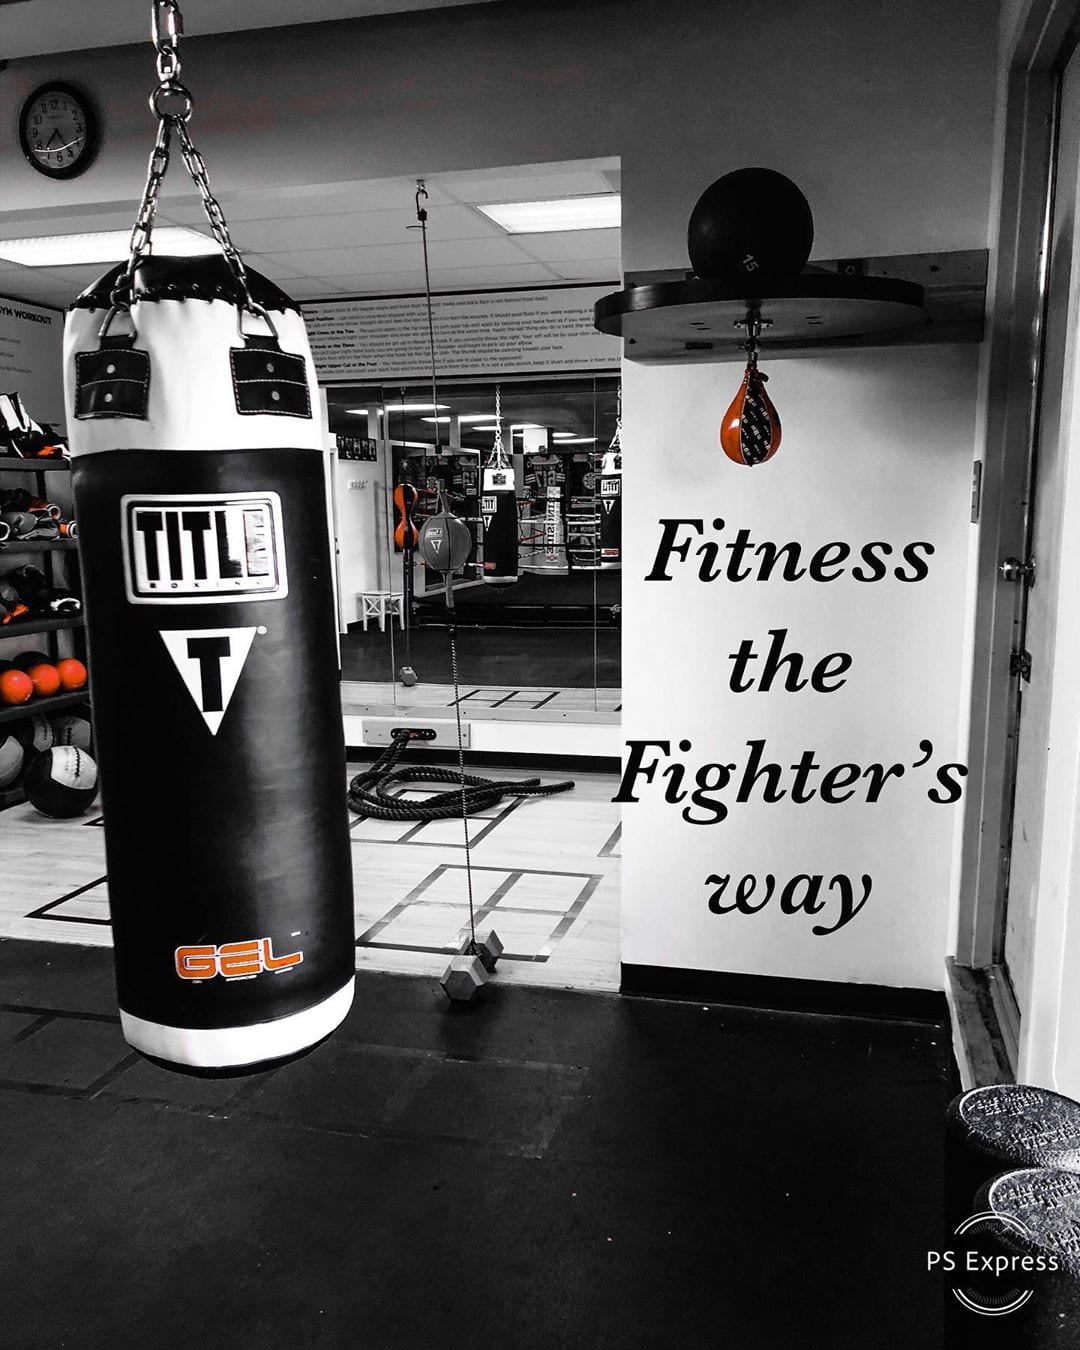 Fitness the Fighter’s way.. Sign up Today to try a FREE Boxing Workout and experience a real Boxers workout . Call (781)727-9503 or email FitBOX@outlook.com. . #boxer #fighter #boxing #boxingtraining #boxingtrainer #fight #fit #fitness #cardio #conditioning #conditioningtraining #mittworkout #mittwork #padwork #free #Dedham #Boston with @tommymcinerney #🥊